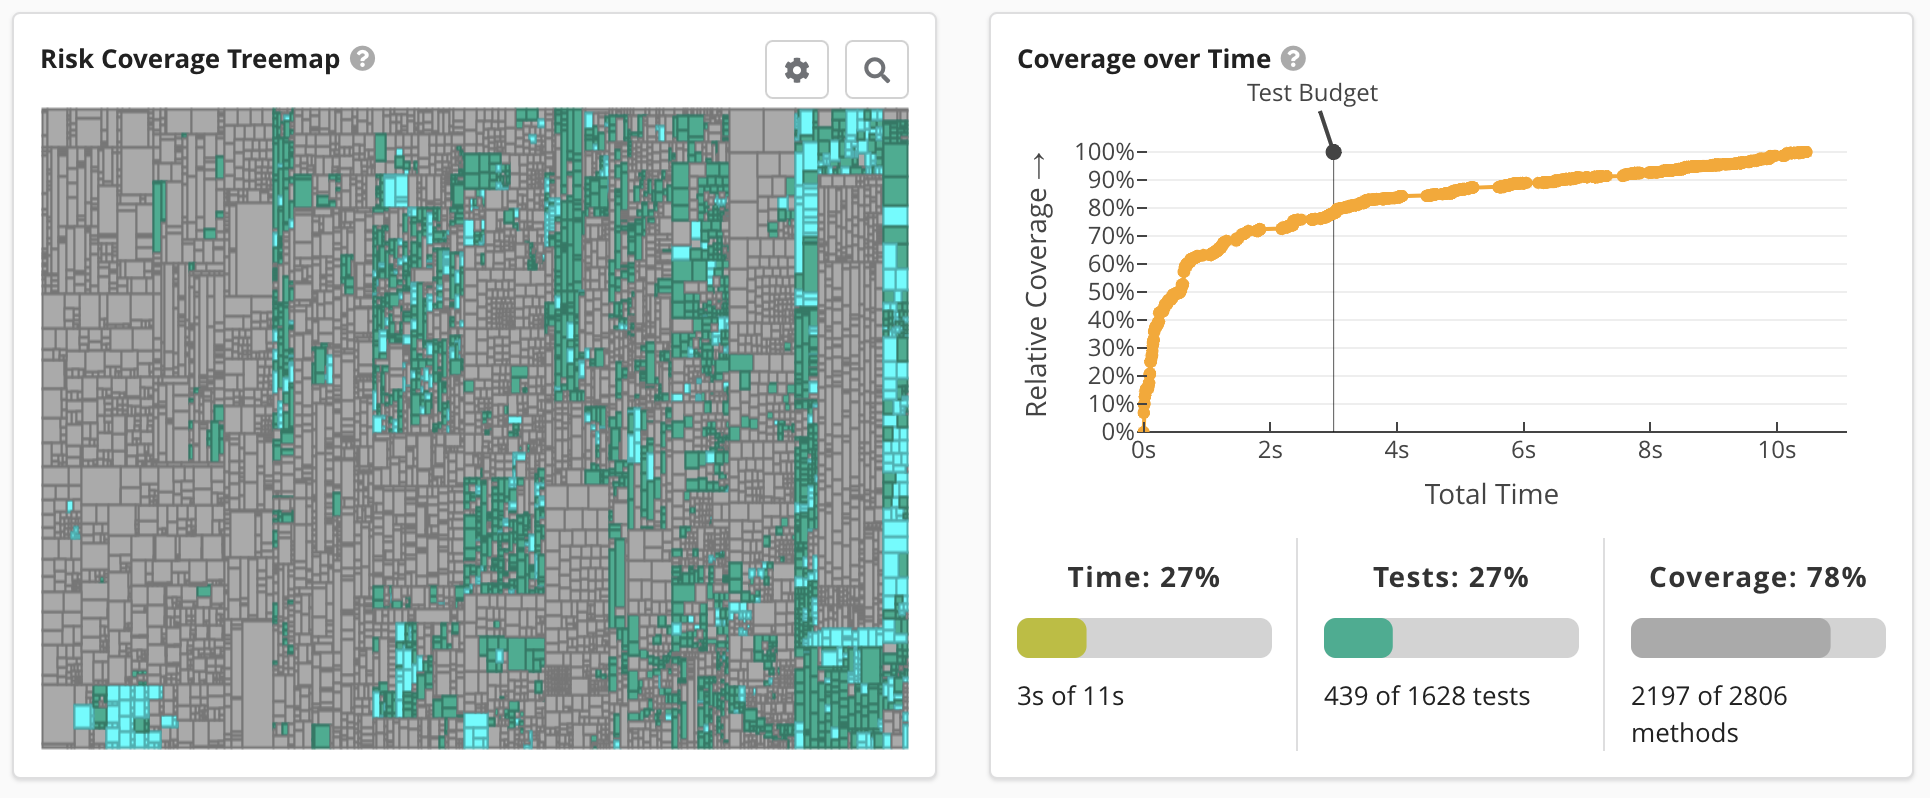 Visualized Time Savings and Coverage